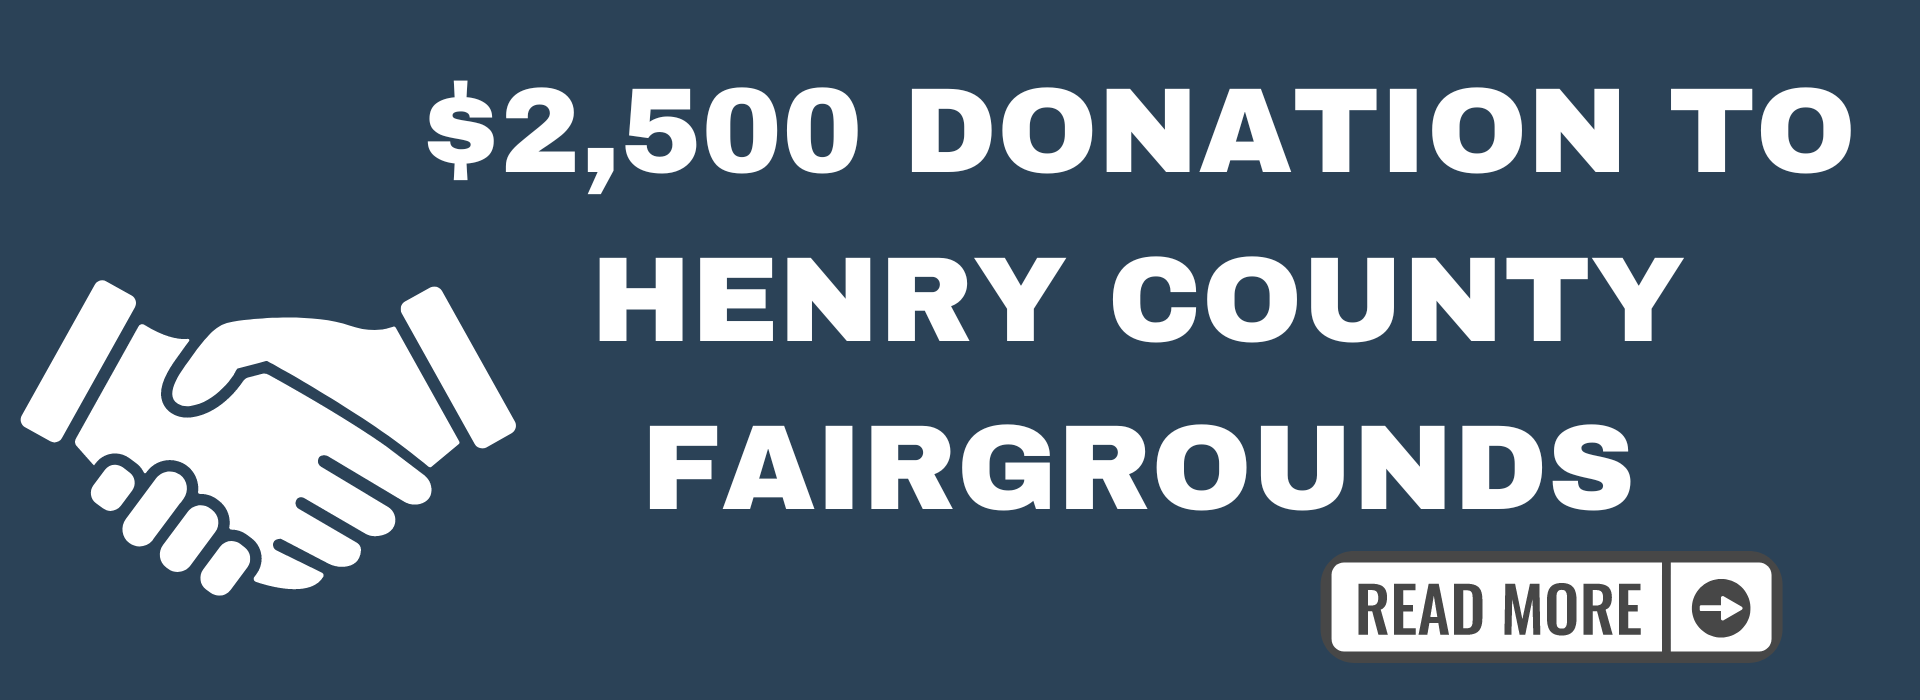 $2,500 Donation to Henry County Fairgrounds